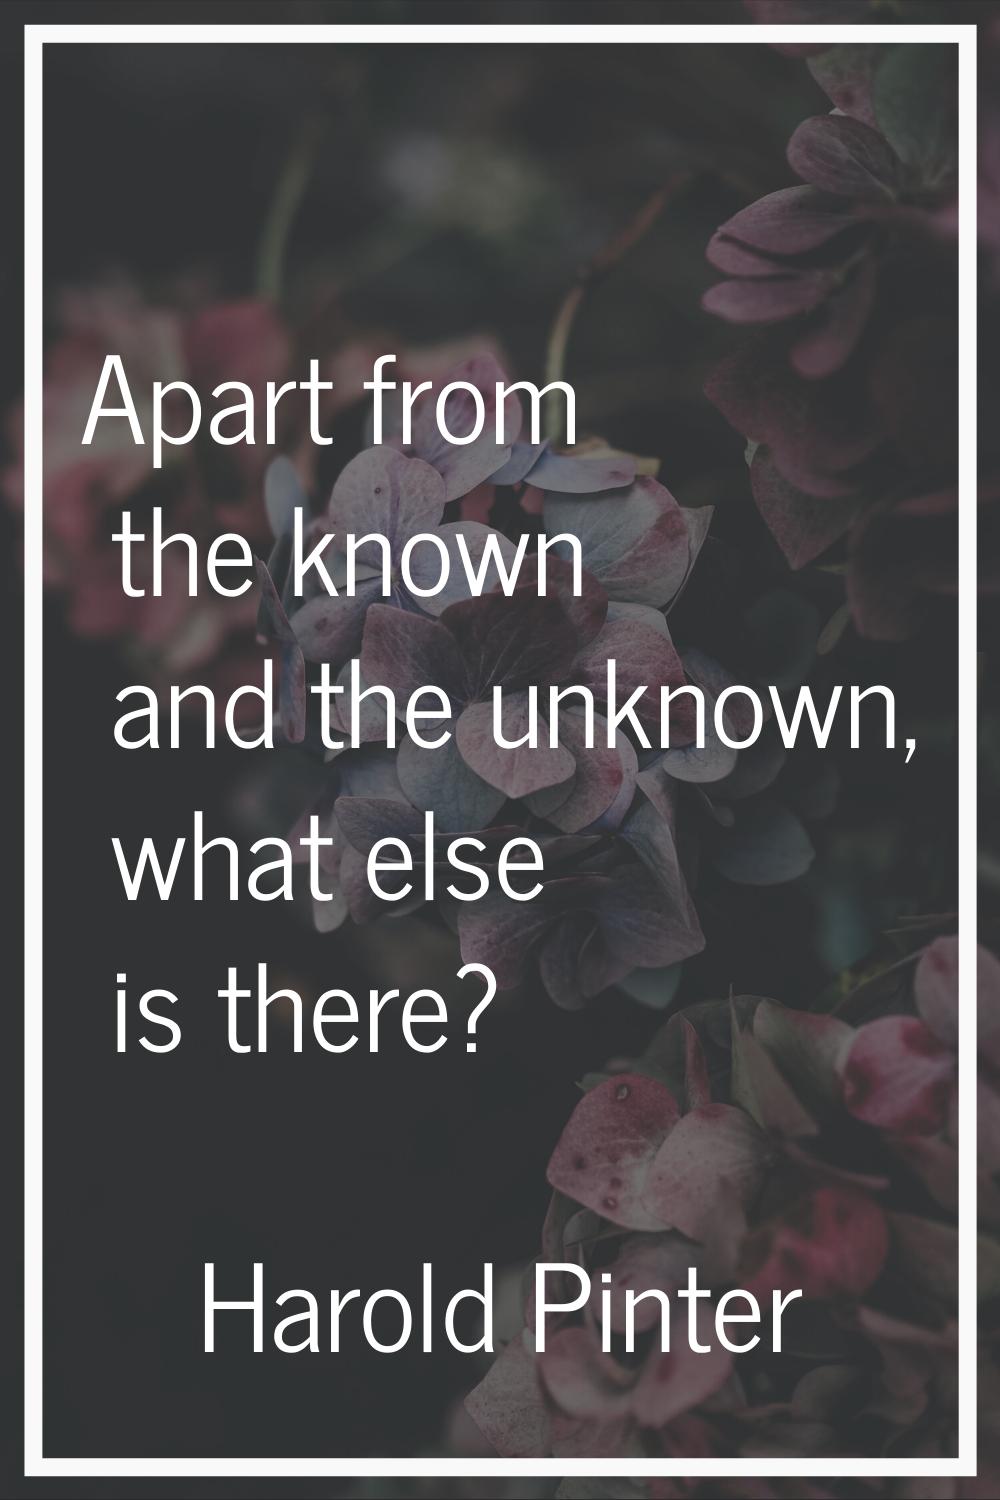 Apart from the known and the unknown, what else is there?